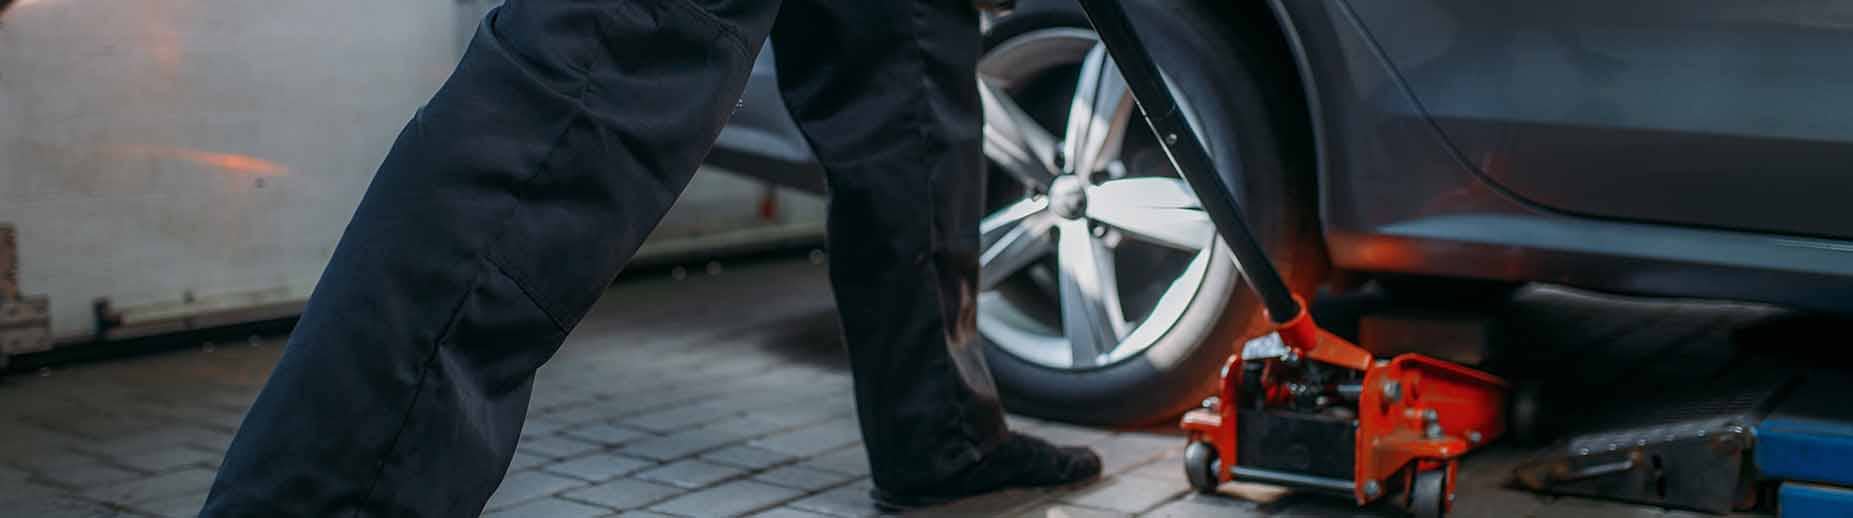 Andover Tire Balancing Services, Tire Rotation and Tire Repair